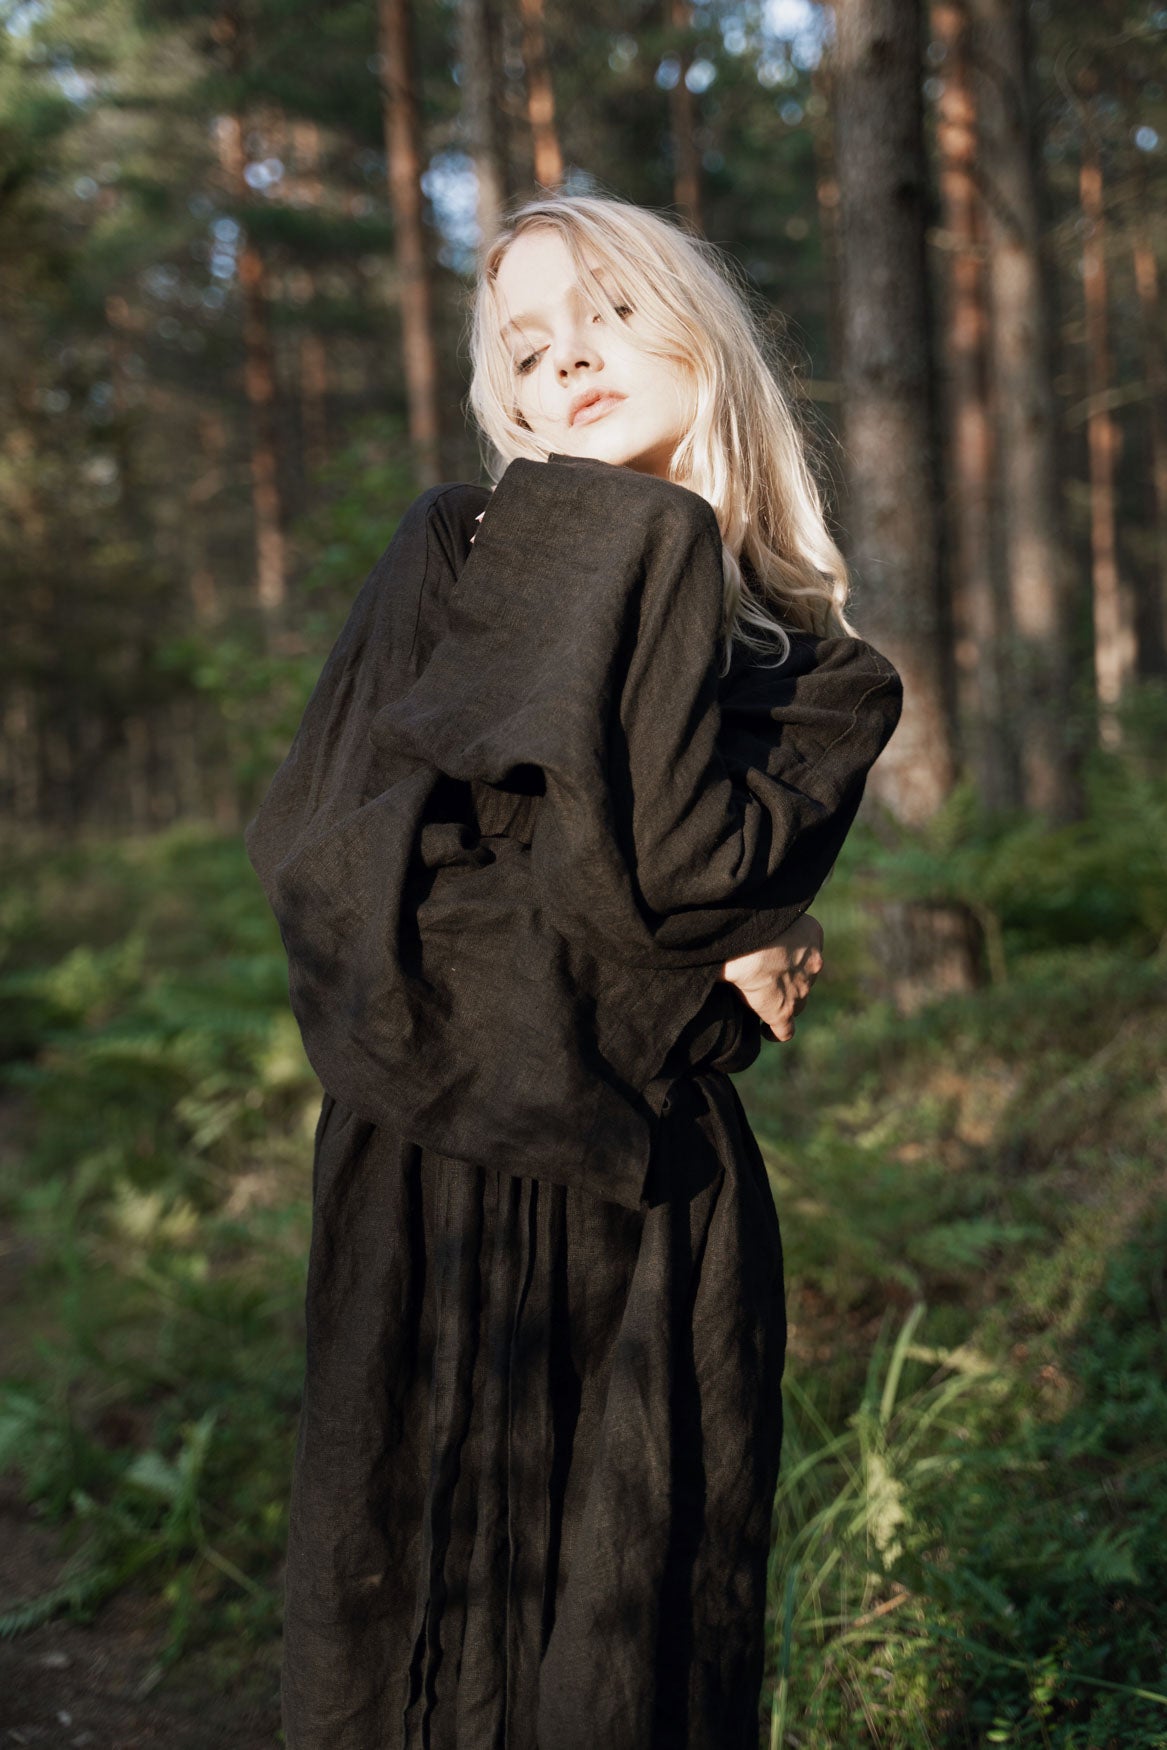 Organic, sustainable and sexy at the same time! Agasåga black kimono with long sleeves and belt. Knee length bathrobe. This robe is natural, soft, breathable and pure. It’s a conscious and healthy choice for your body and environment that embraces genuine selflove and selfcare. Handmade with love in the North.